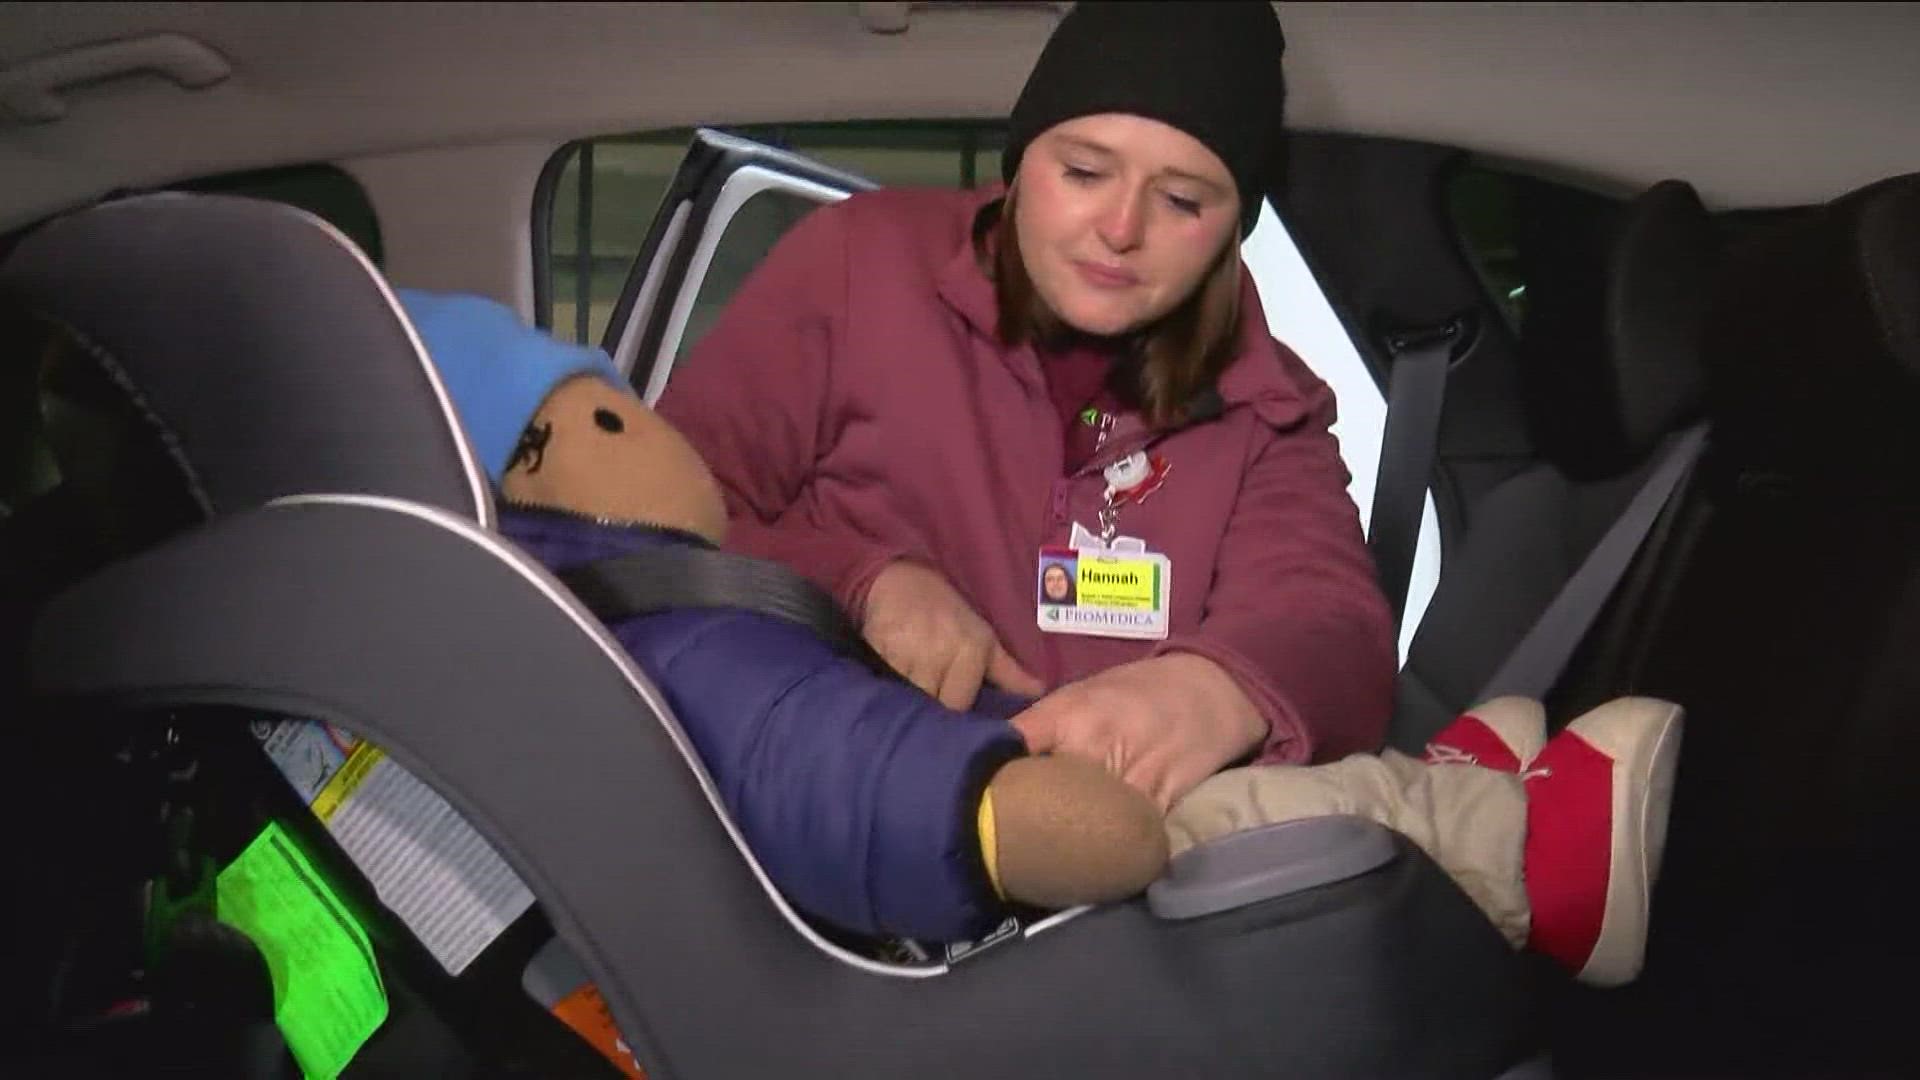 Winter Coats in Car Seats Are Dangerous. So, How Can You Keep Your